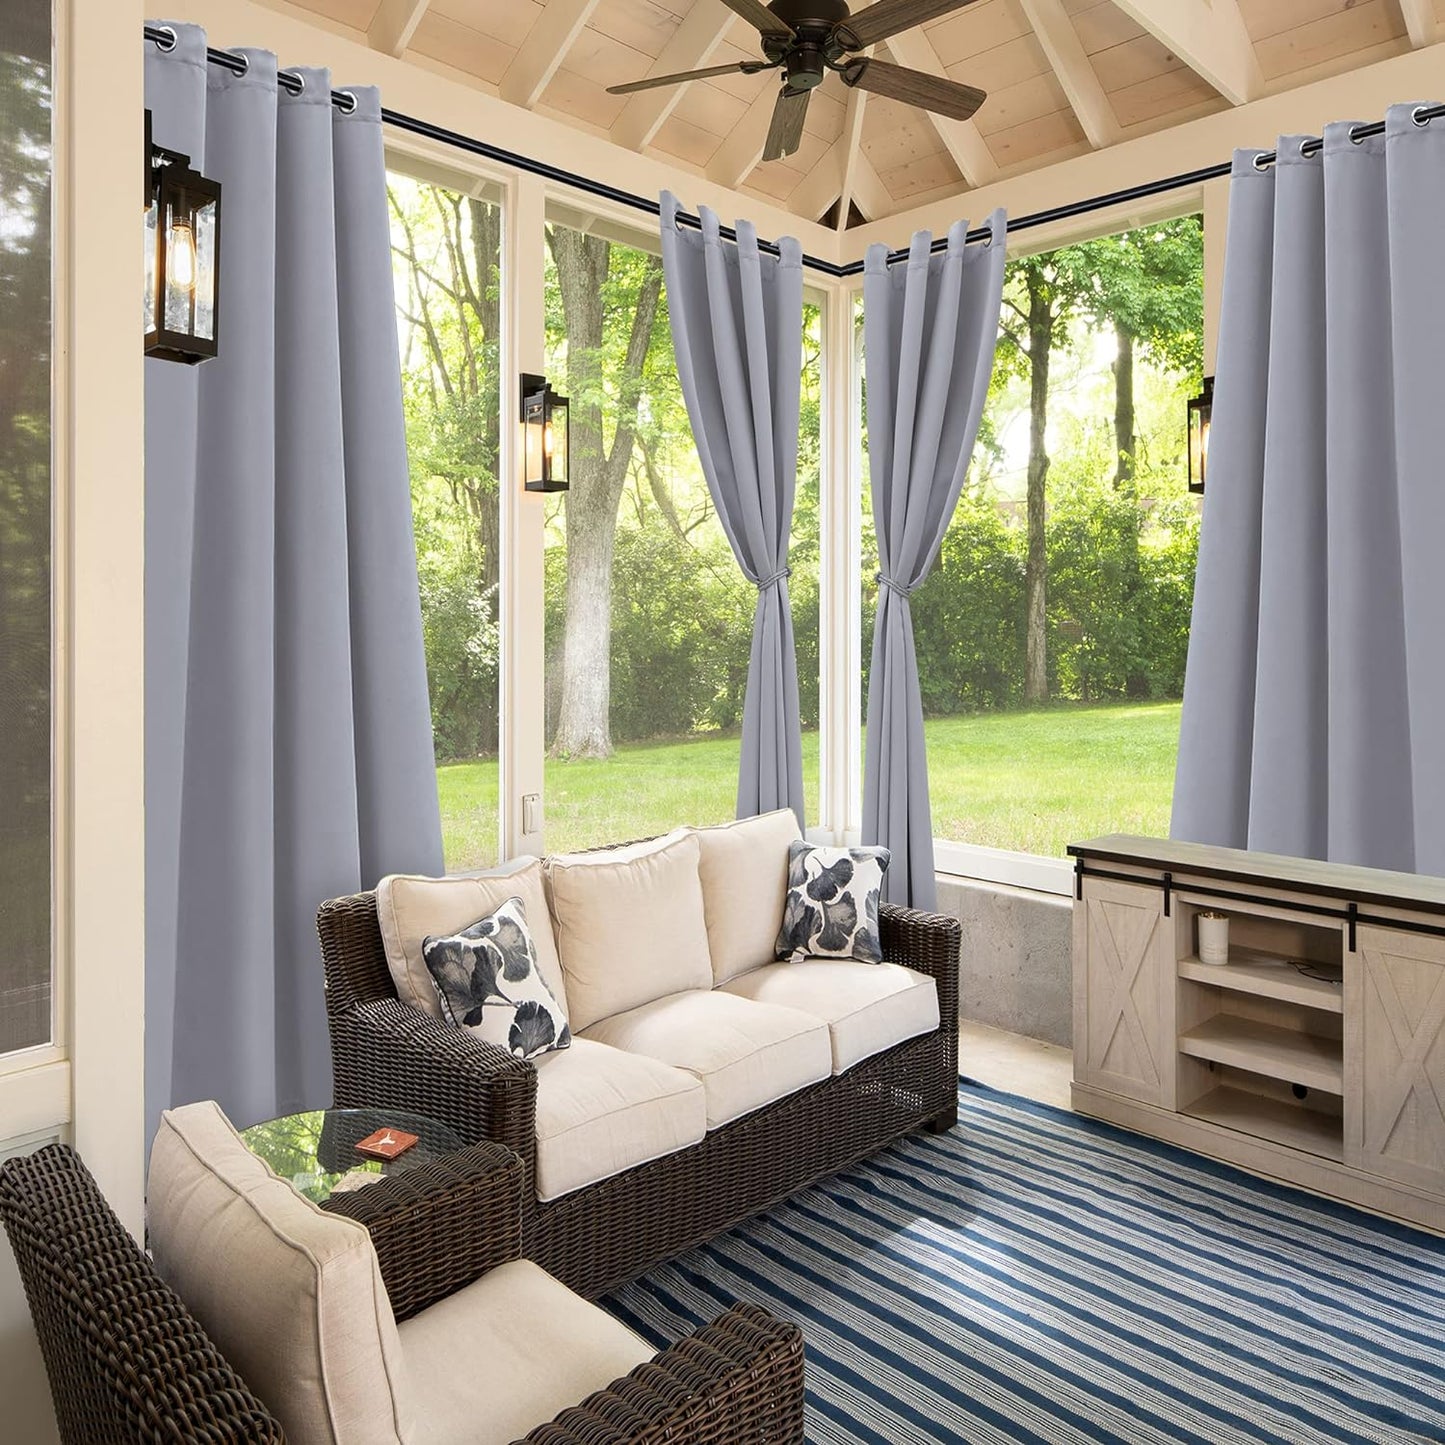 BONZER Outdoor Curtains for Patio Waterproof - Light Blocking Weather Resistant Privacy Grommet Blackout Curtains for Gazebo, Porch, Pergola, Cabana, Deck, Sunroom, 1 Panel, 52W X 84L Inch, Silver  BONZER   